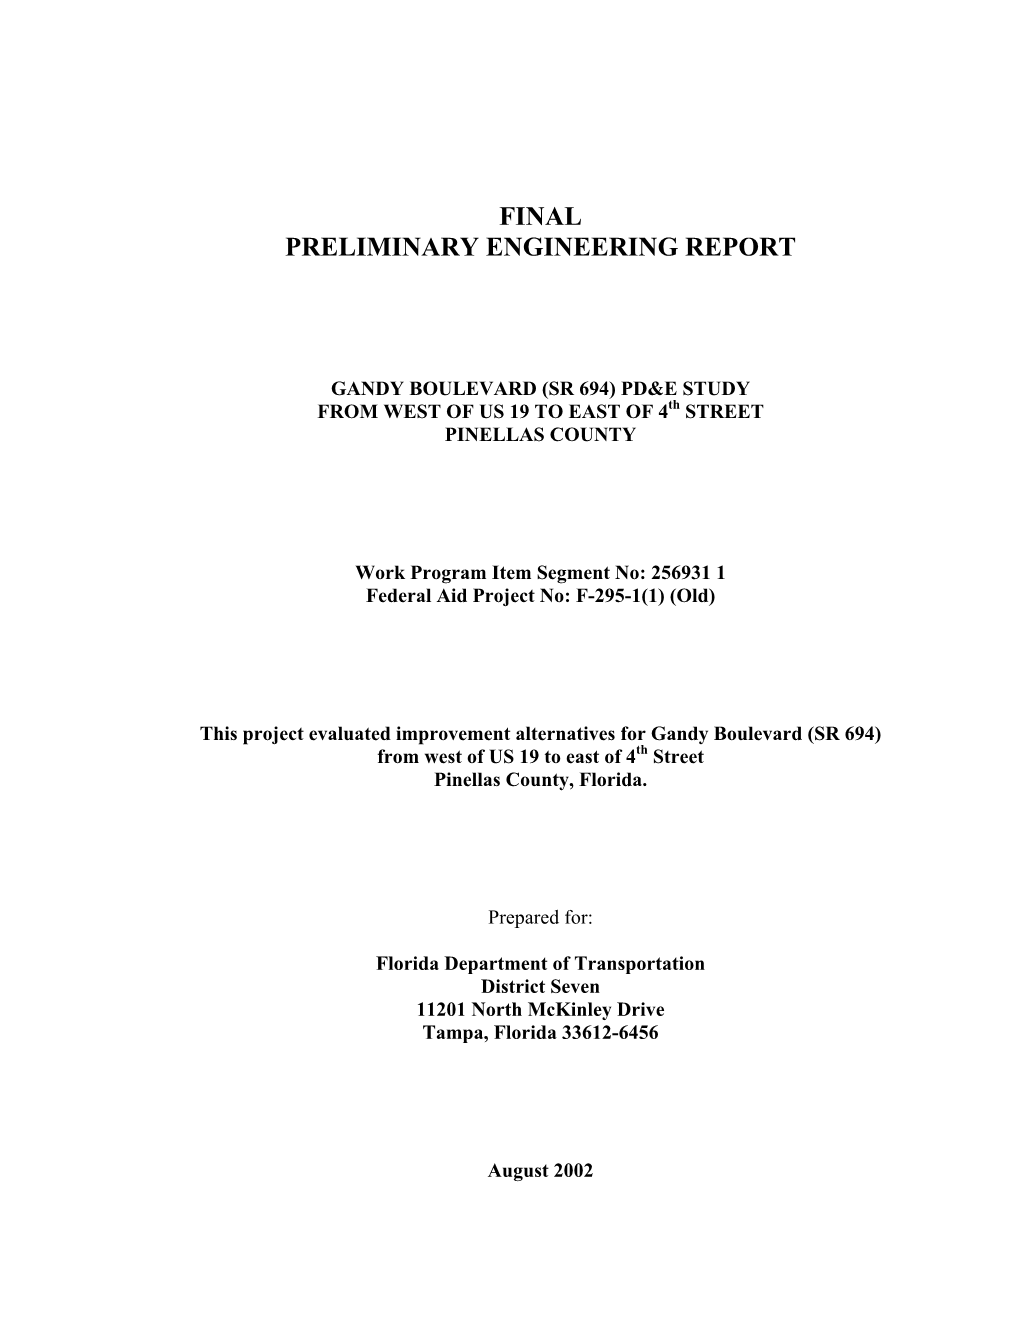 Final Preliminary Engineering Report